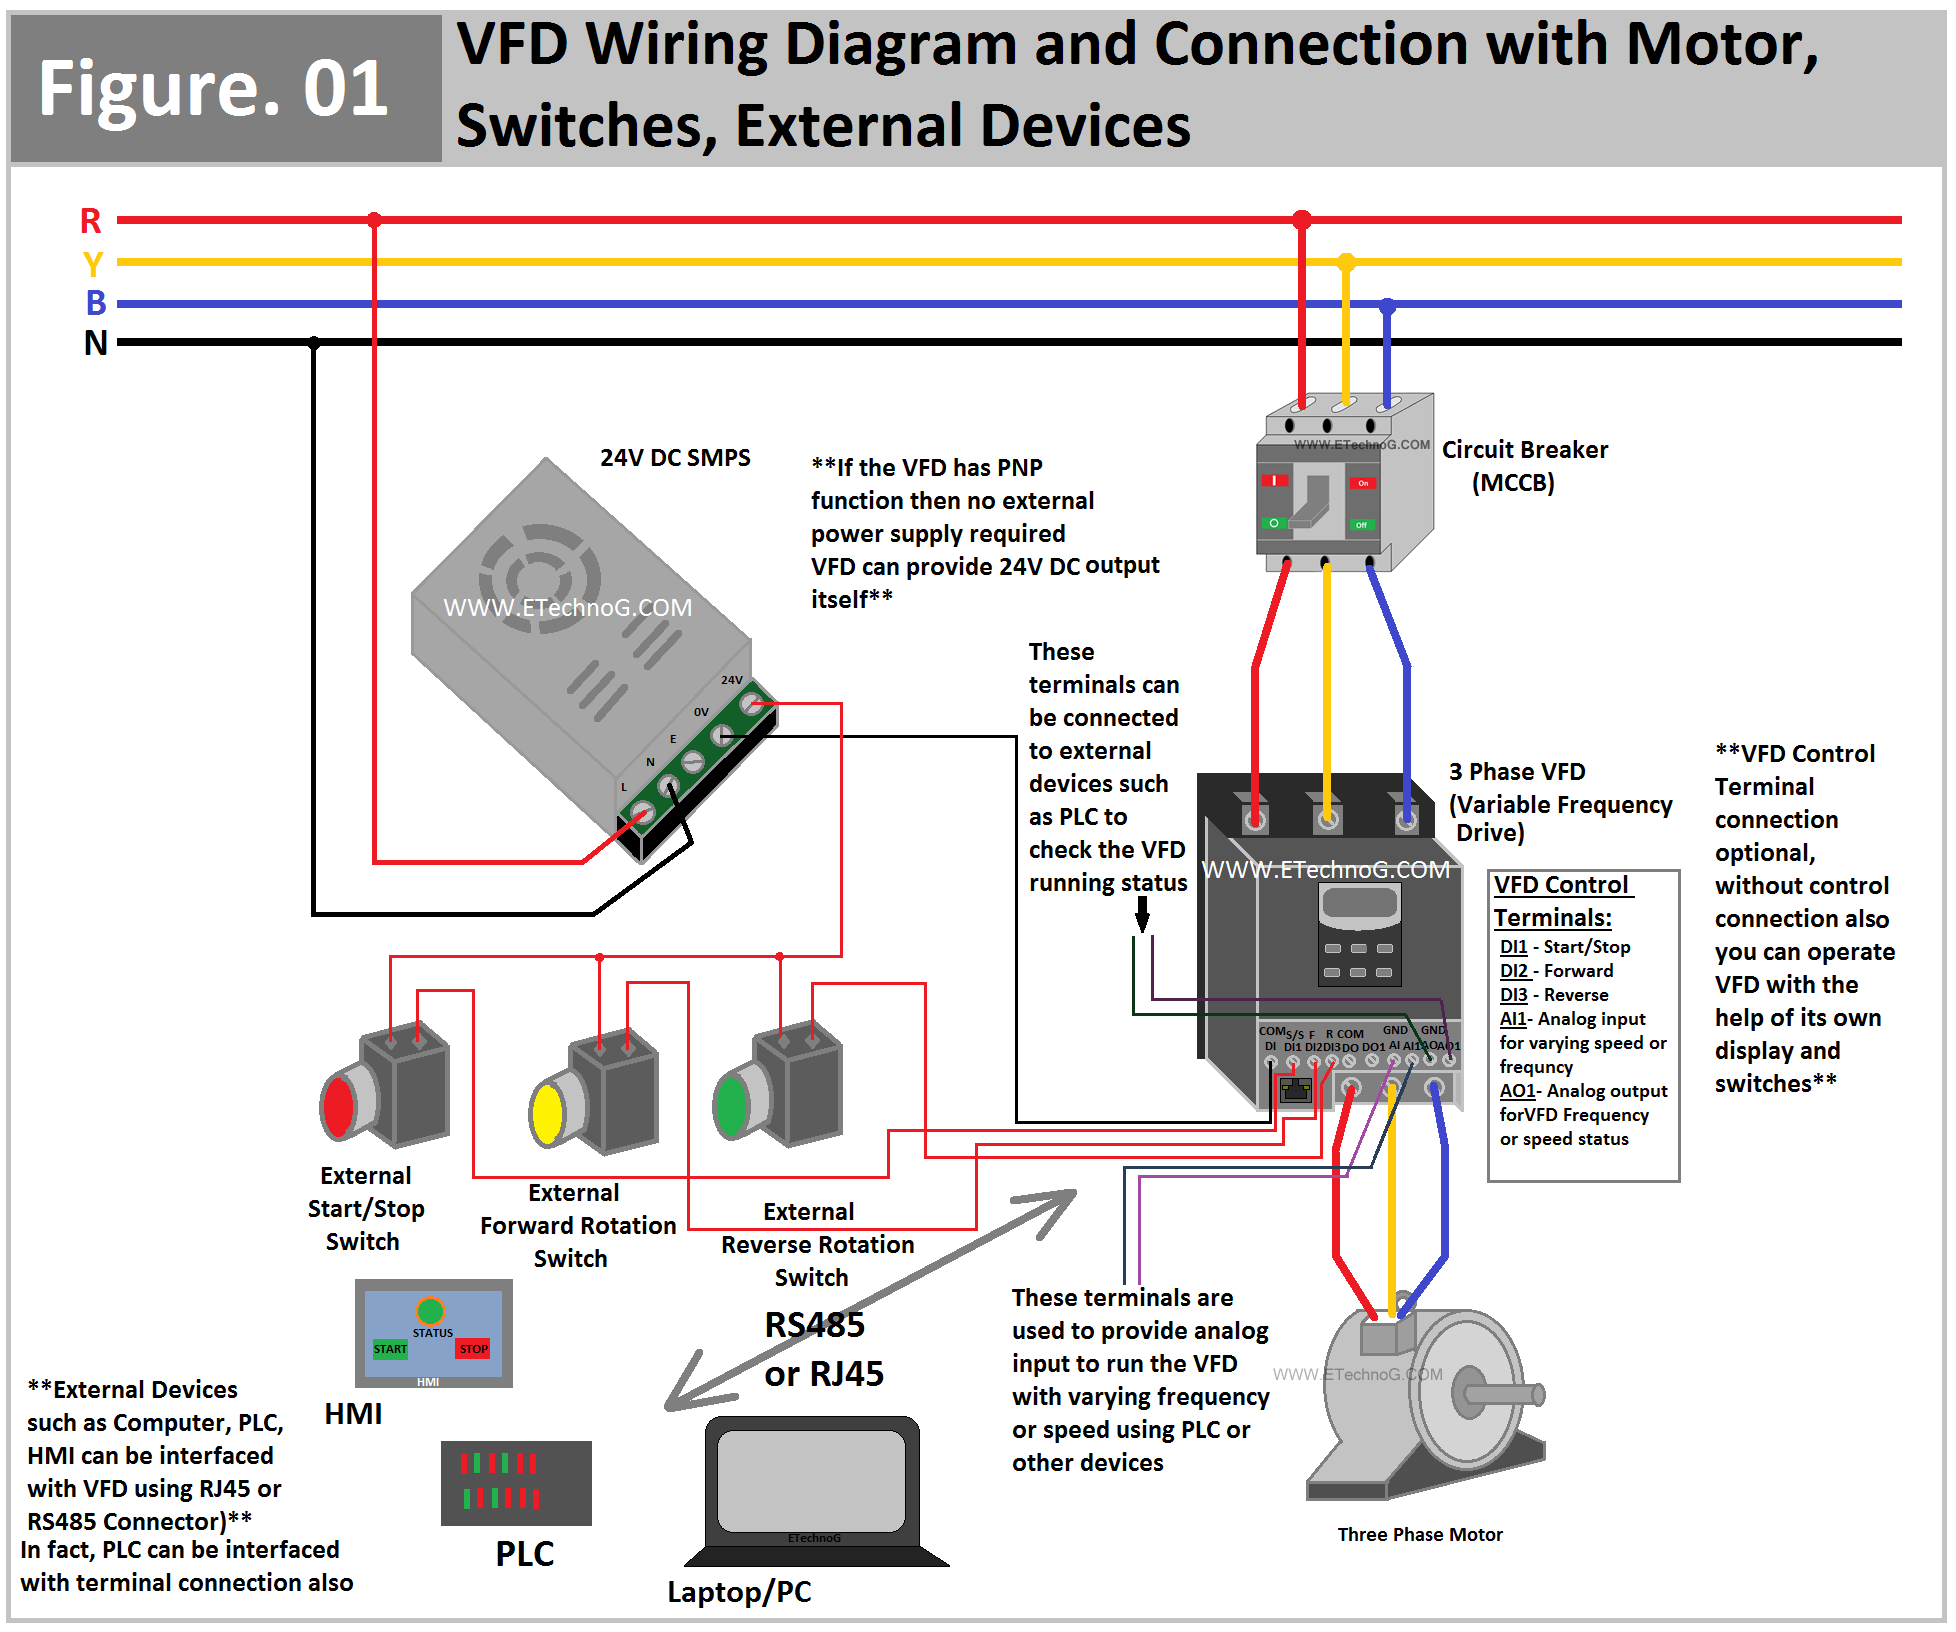 VFD Wiring and Connection Diagram with Motor, Switches, Control circuit, External Devices(PLC, HMI, PC)